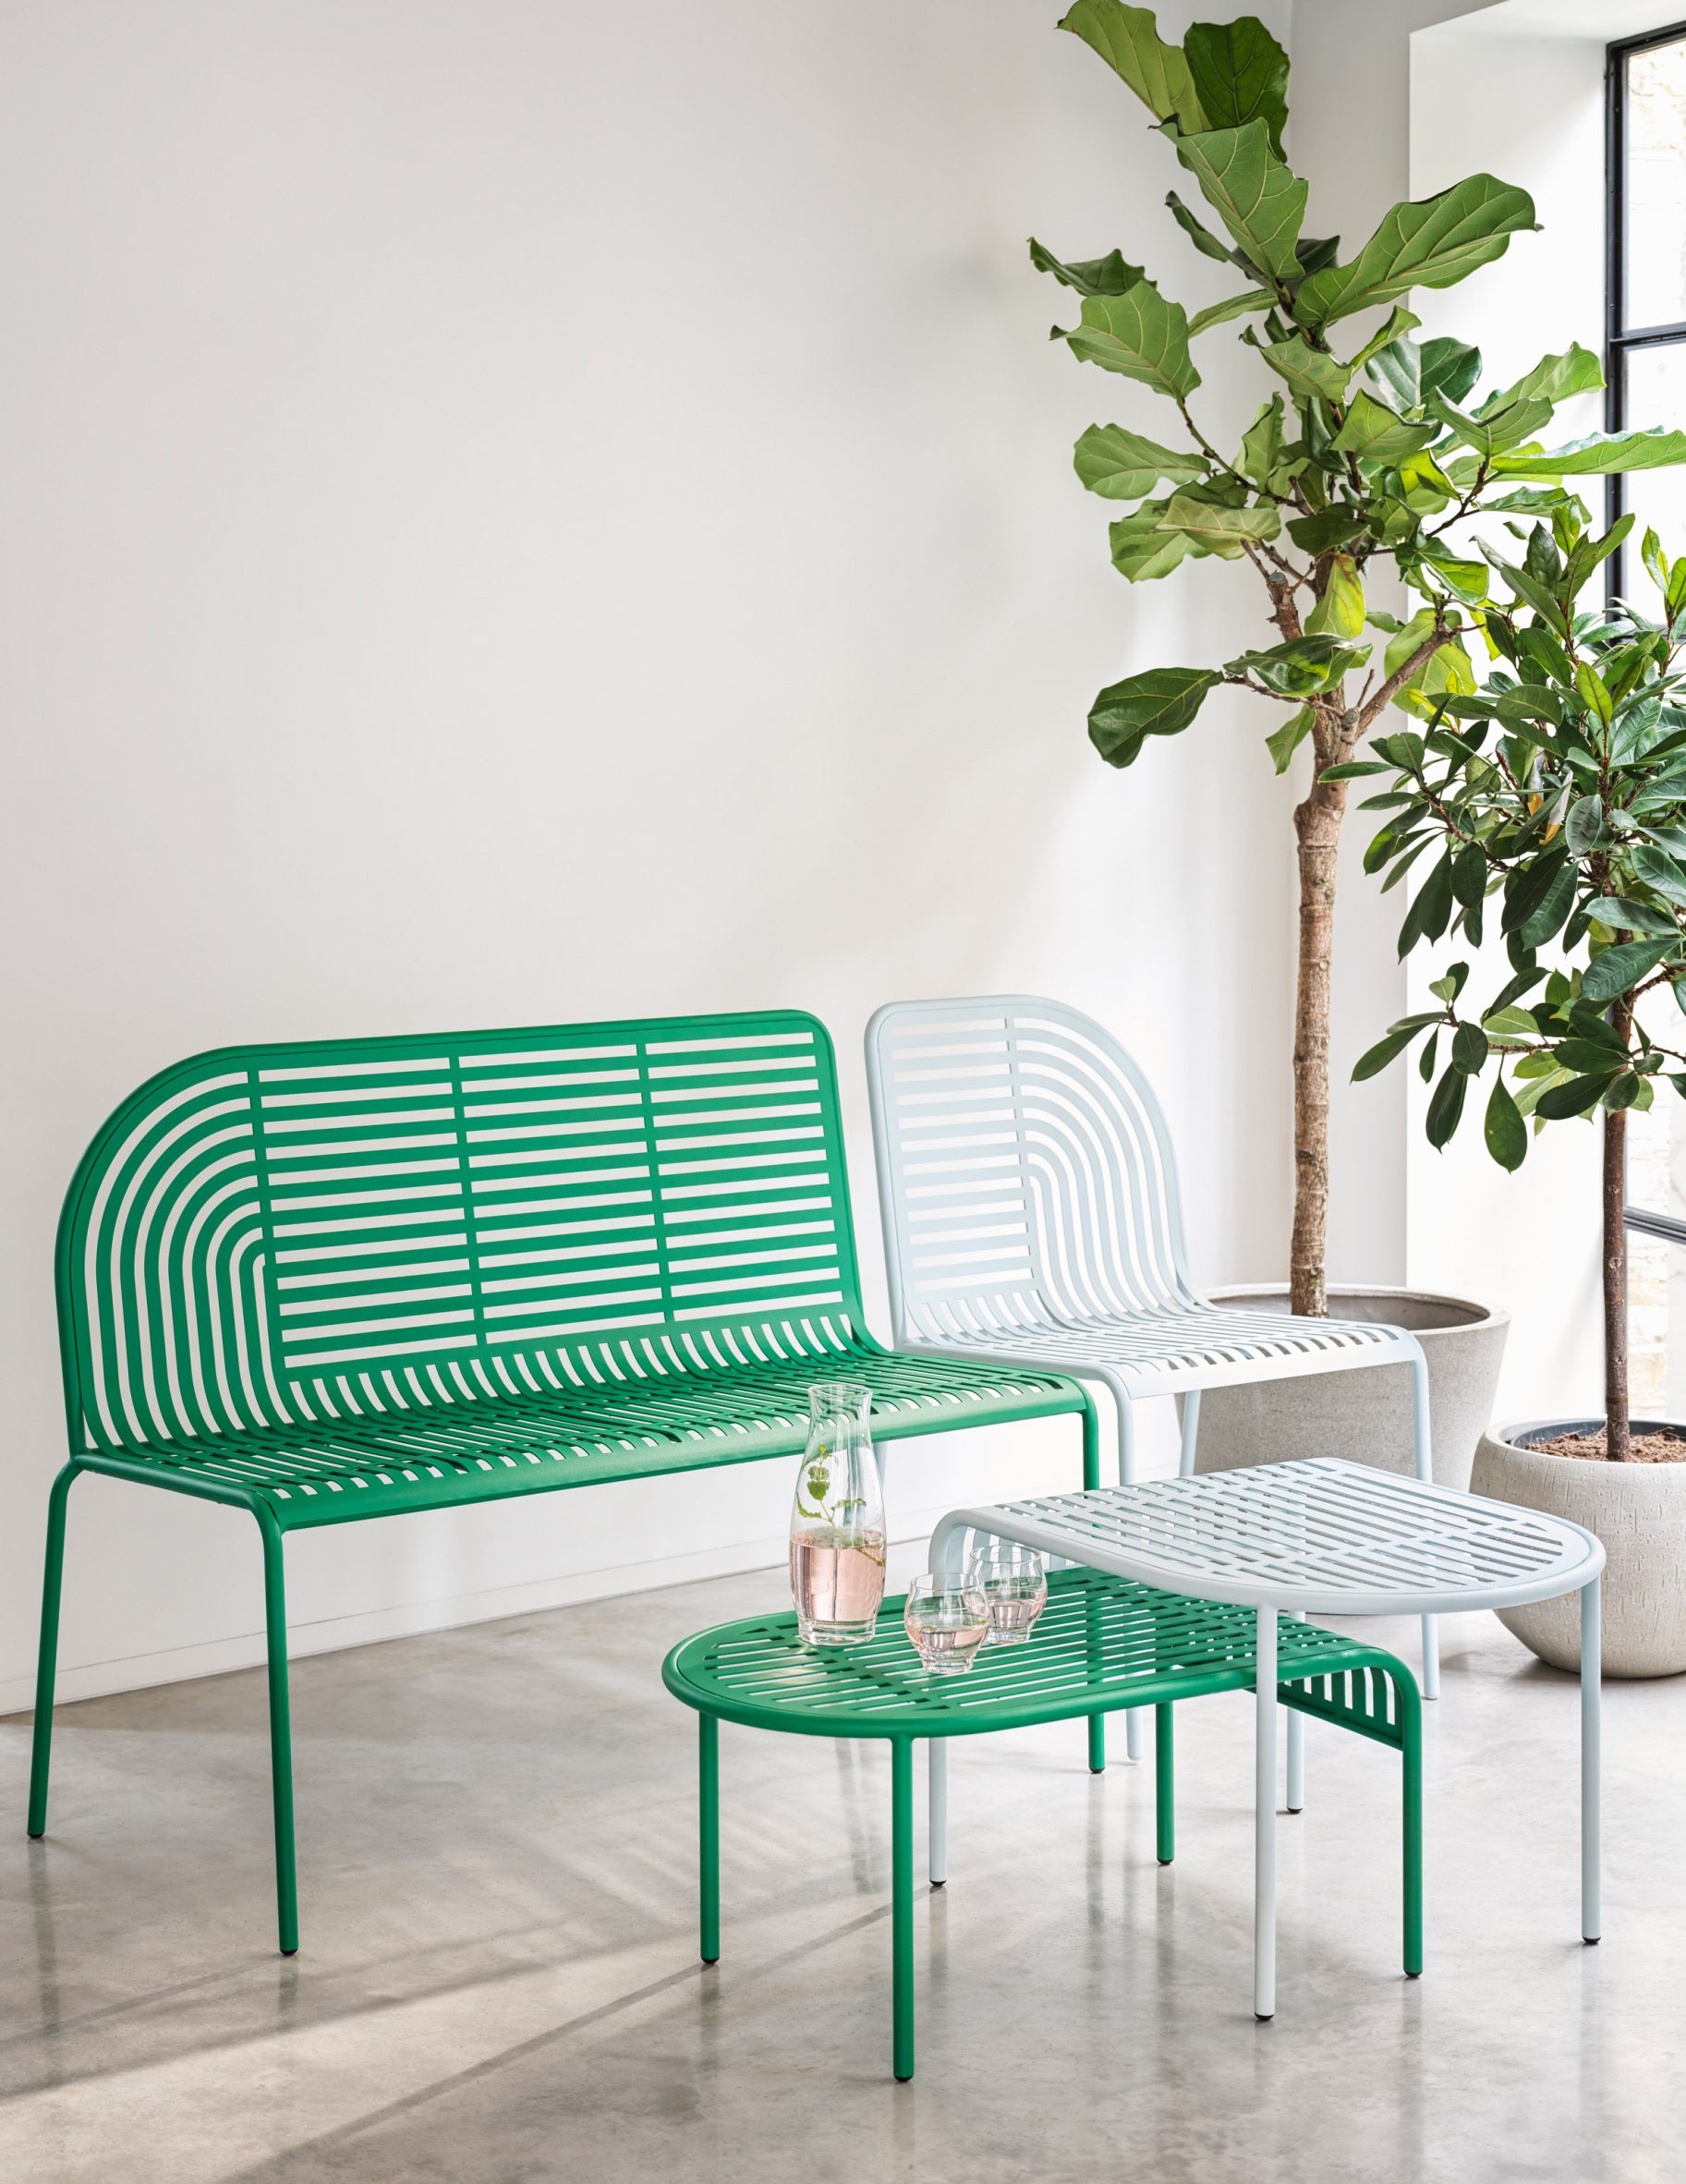 Lifestyle photo of Habitat's green and white outdoor chair, bench and nesting tables with plasma cut patterns